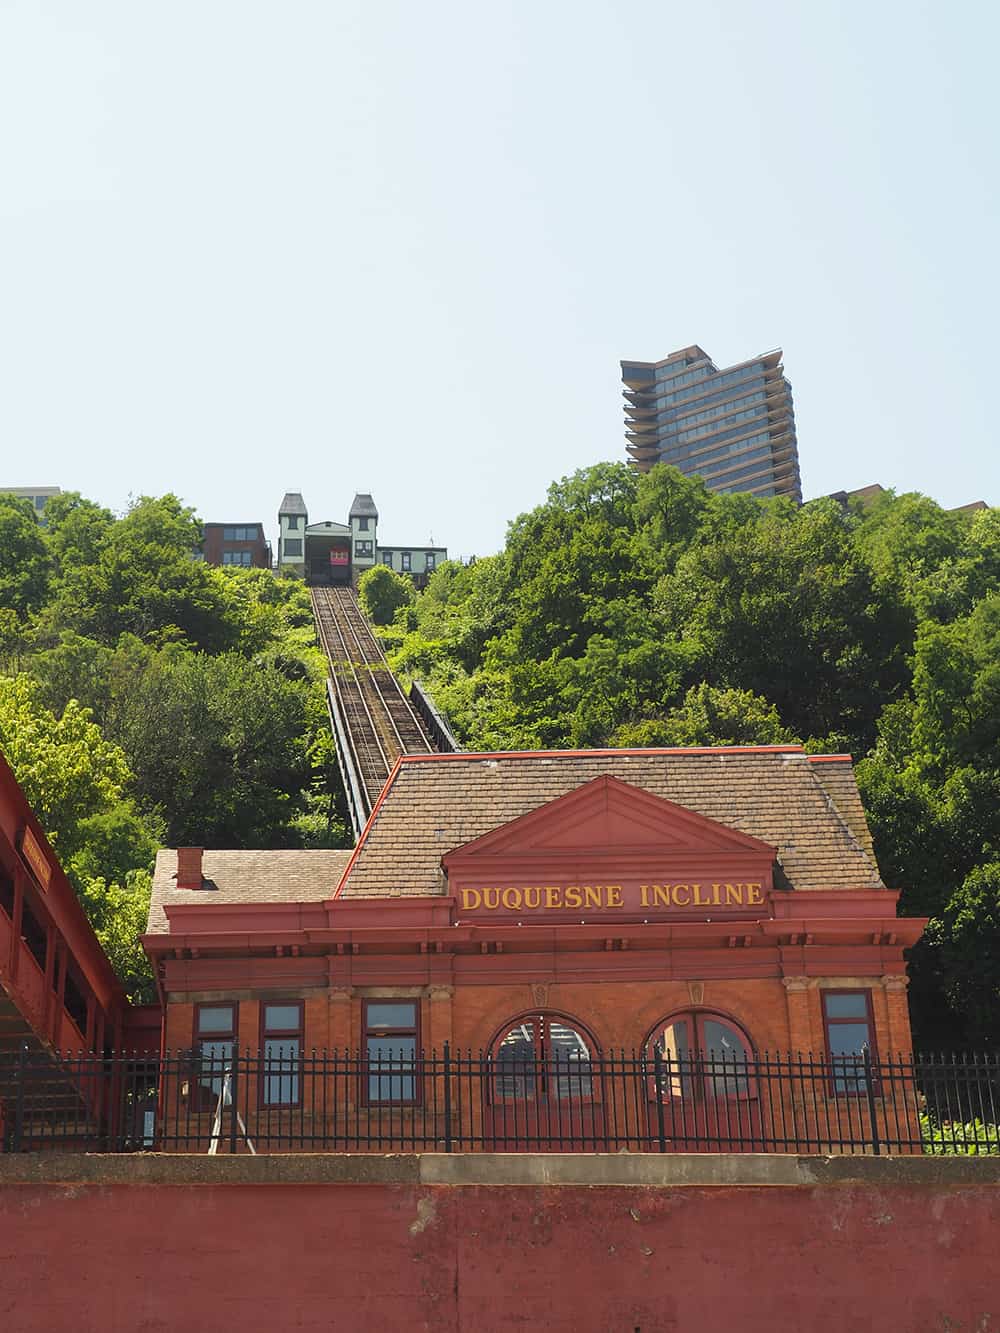 The Duquesne Incline is a funicular in Pittsburgh, Pennsylvania that was originally opened in 1877. It was almost closed permanently in 1962, but was reopened and repaired. It is now Pittsburgh's most popular tourist attraction. | affordable family day trip + places to visit in Pittsburgh, Pennsylvania via Autumn All Along